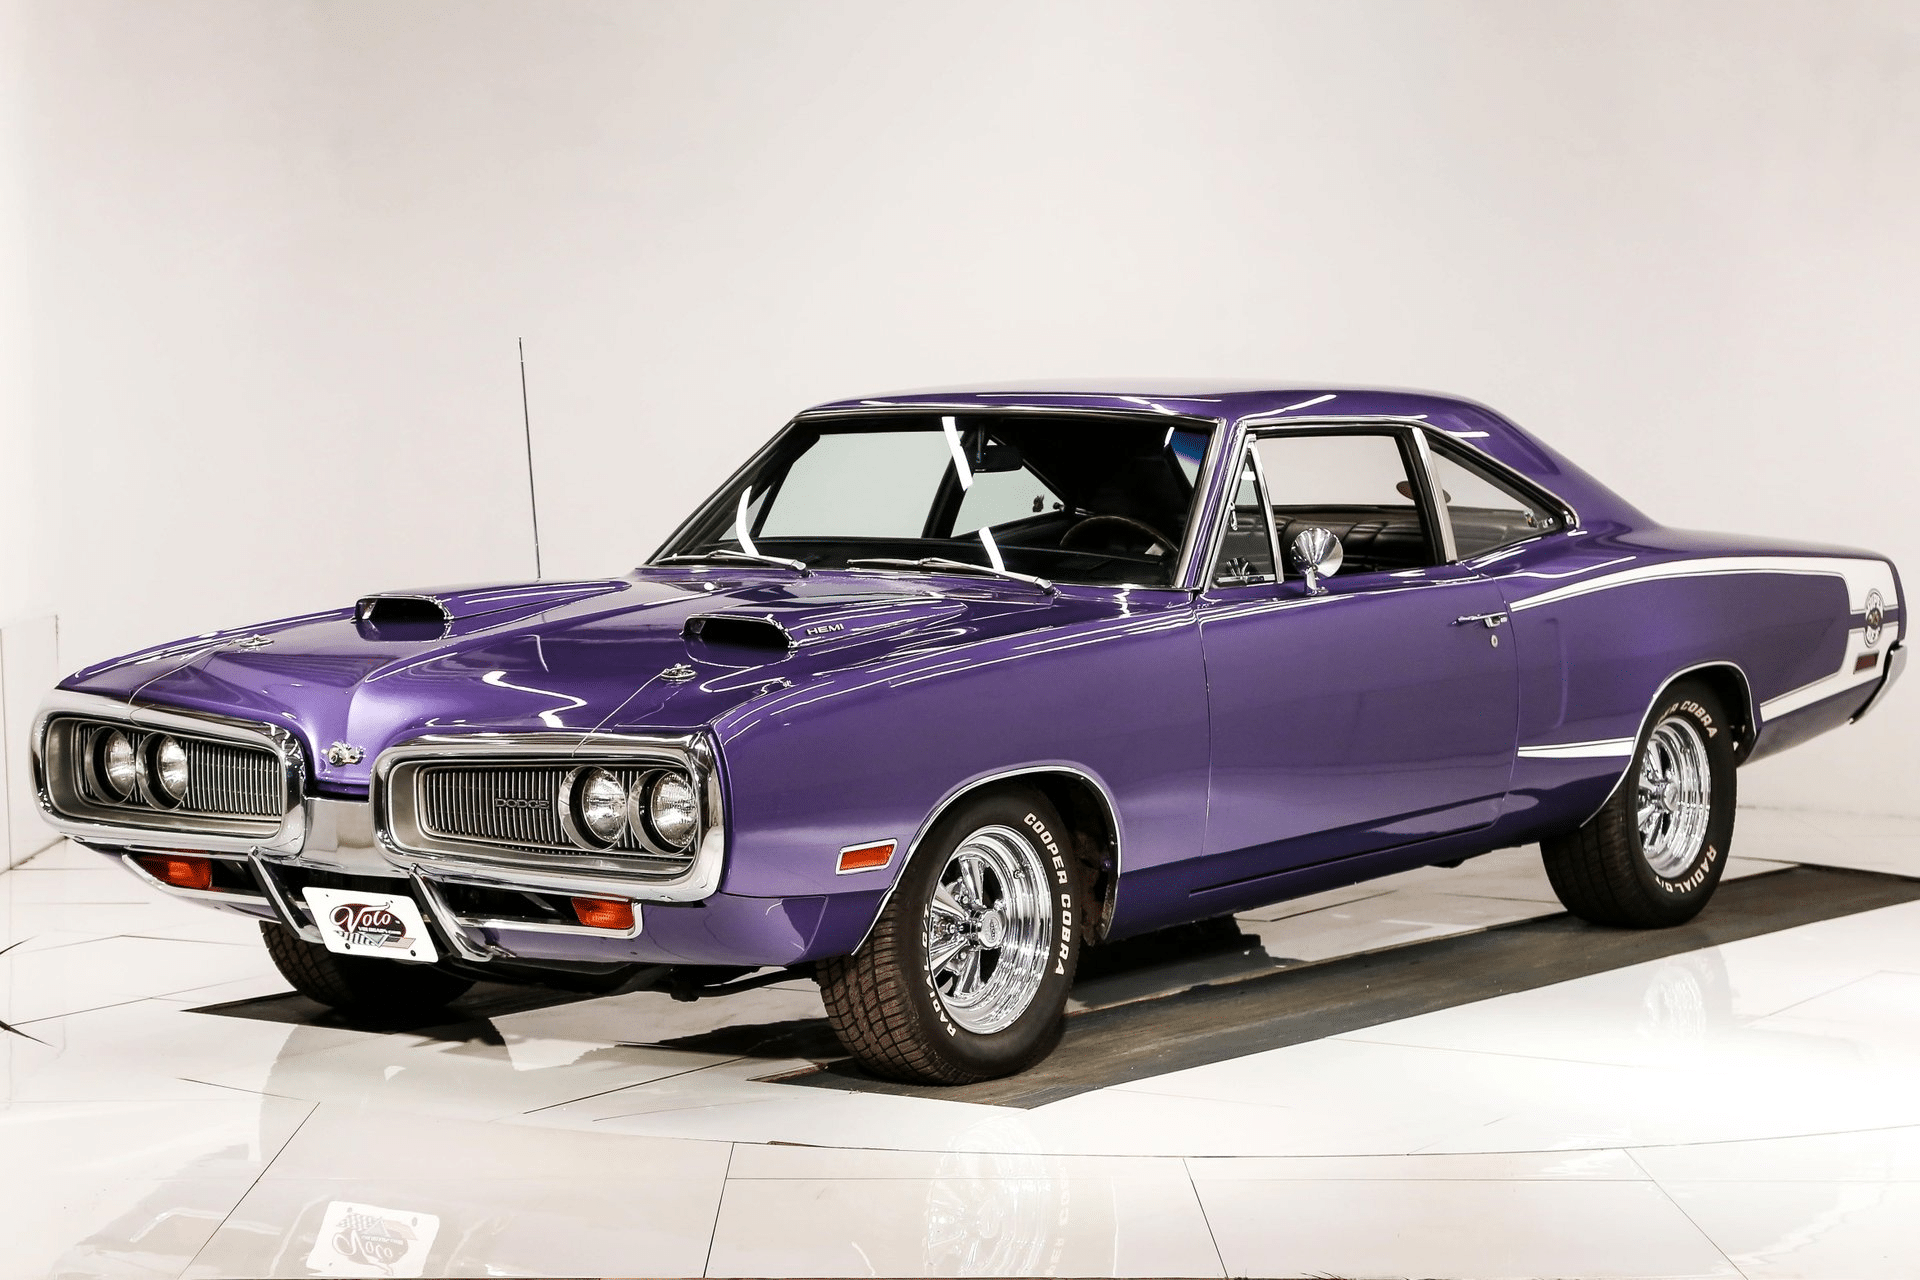 1970 Dodge Super Bee: Fast and Reliable Muscle Car with NASCAR Hemi Power